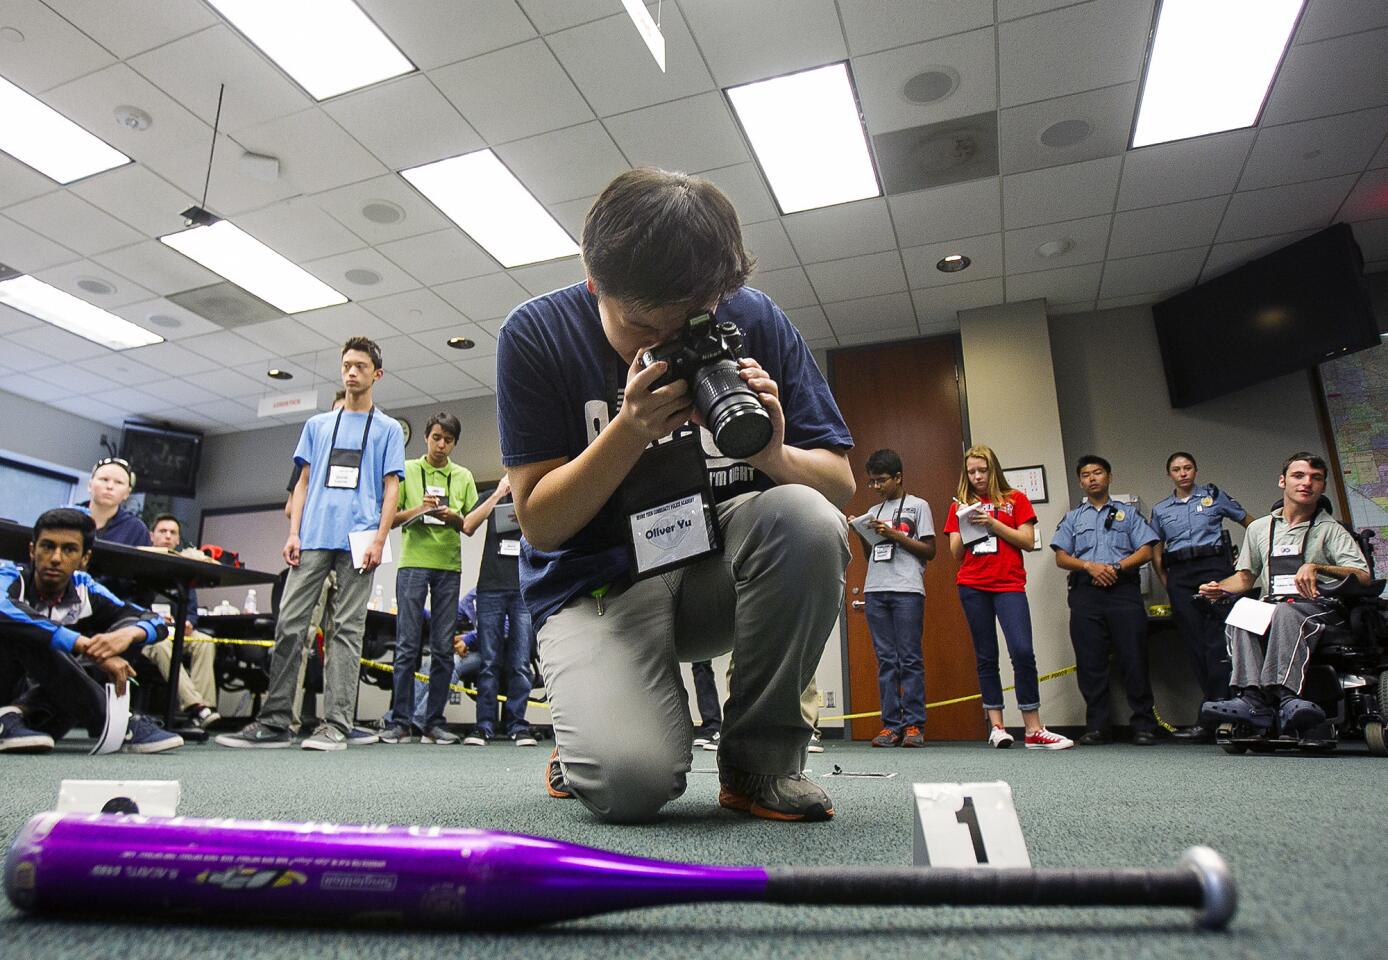 Oliver Yu takes photos of evidence at a mock crime scene using CSI techniques during the Teen Community Police Academy put on by Irvine Police on Tuesday, August 11.